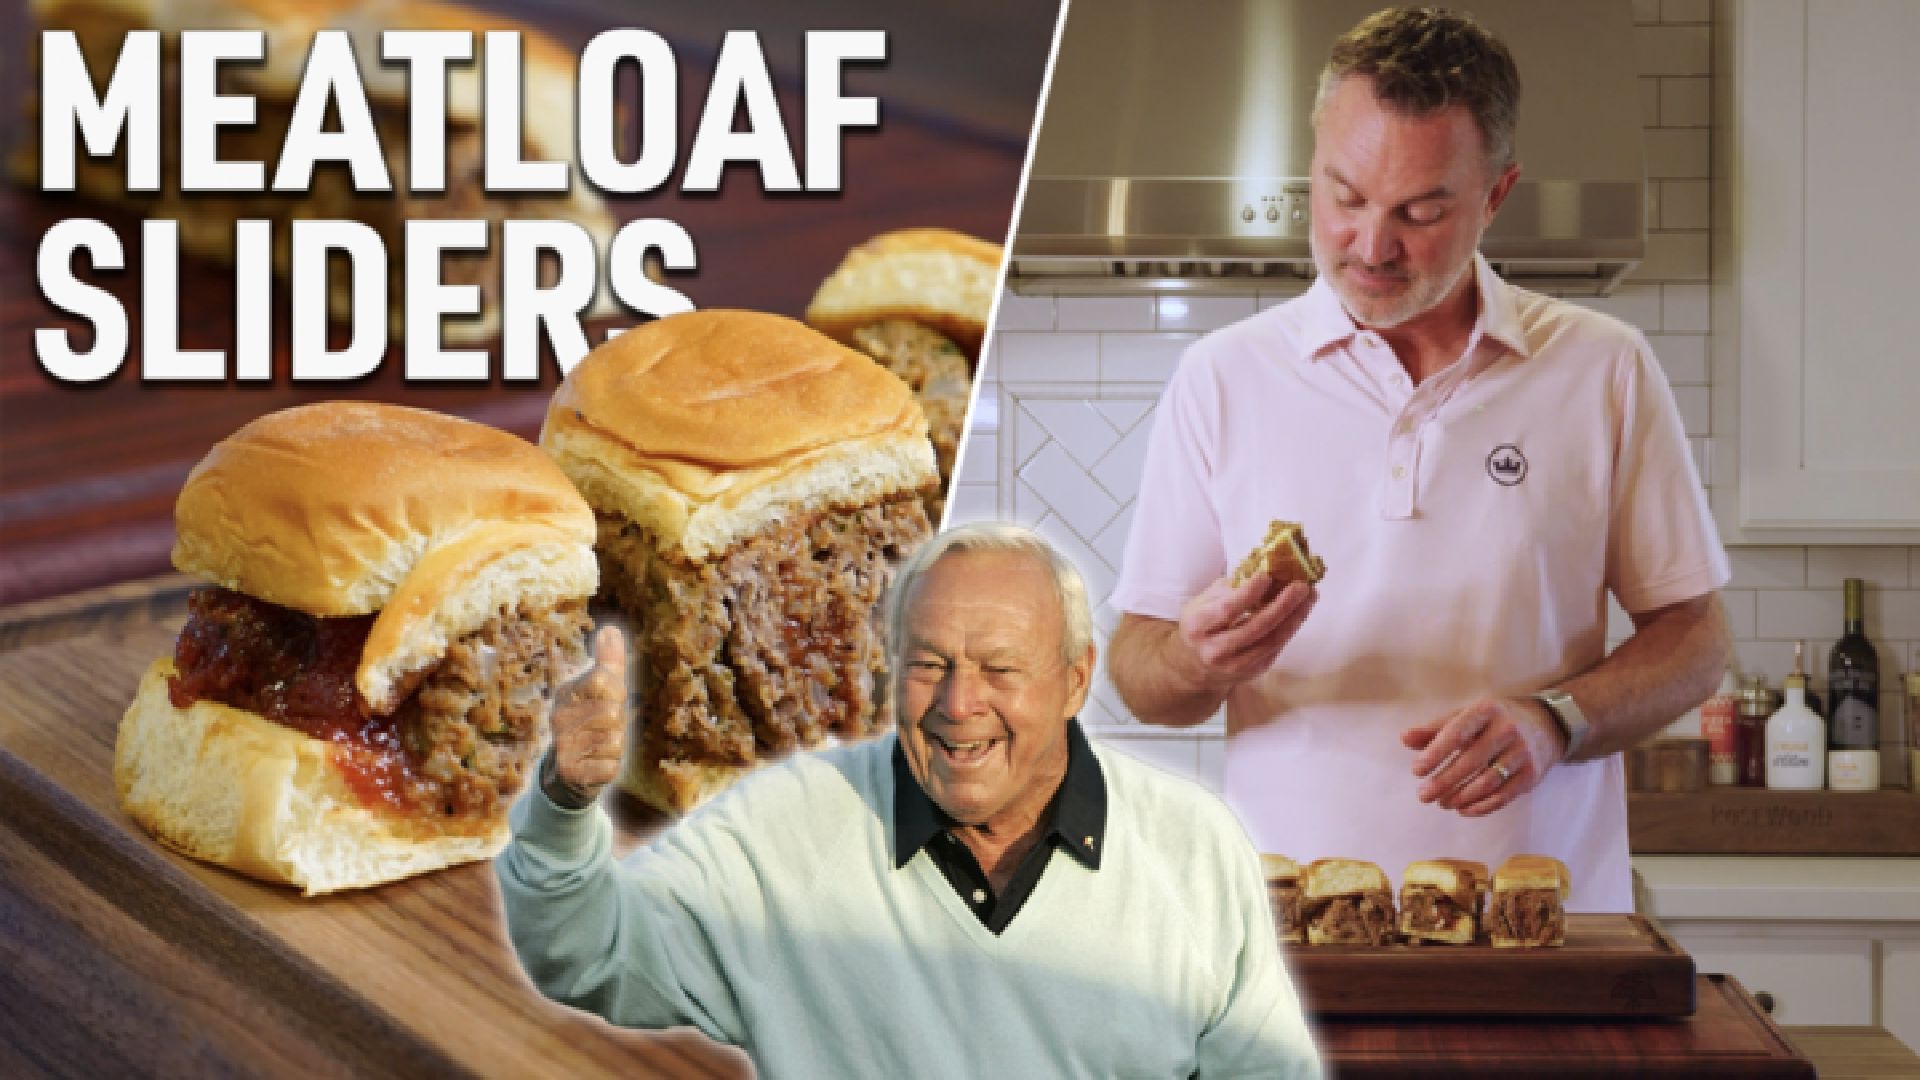 How to make meatloaf sliders, a twist on Arnold Palmer's favorite dish